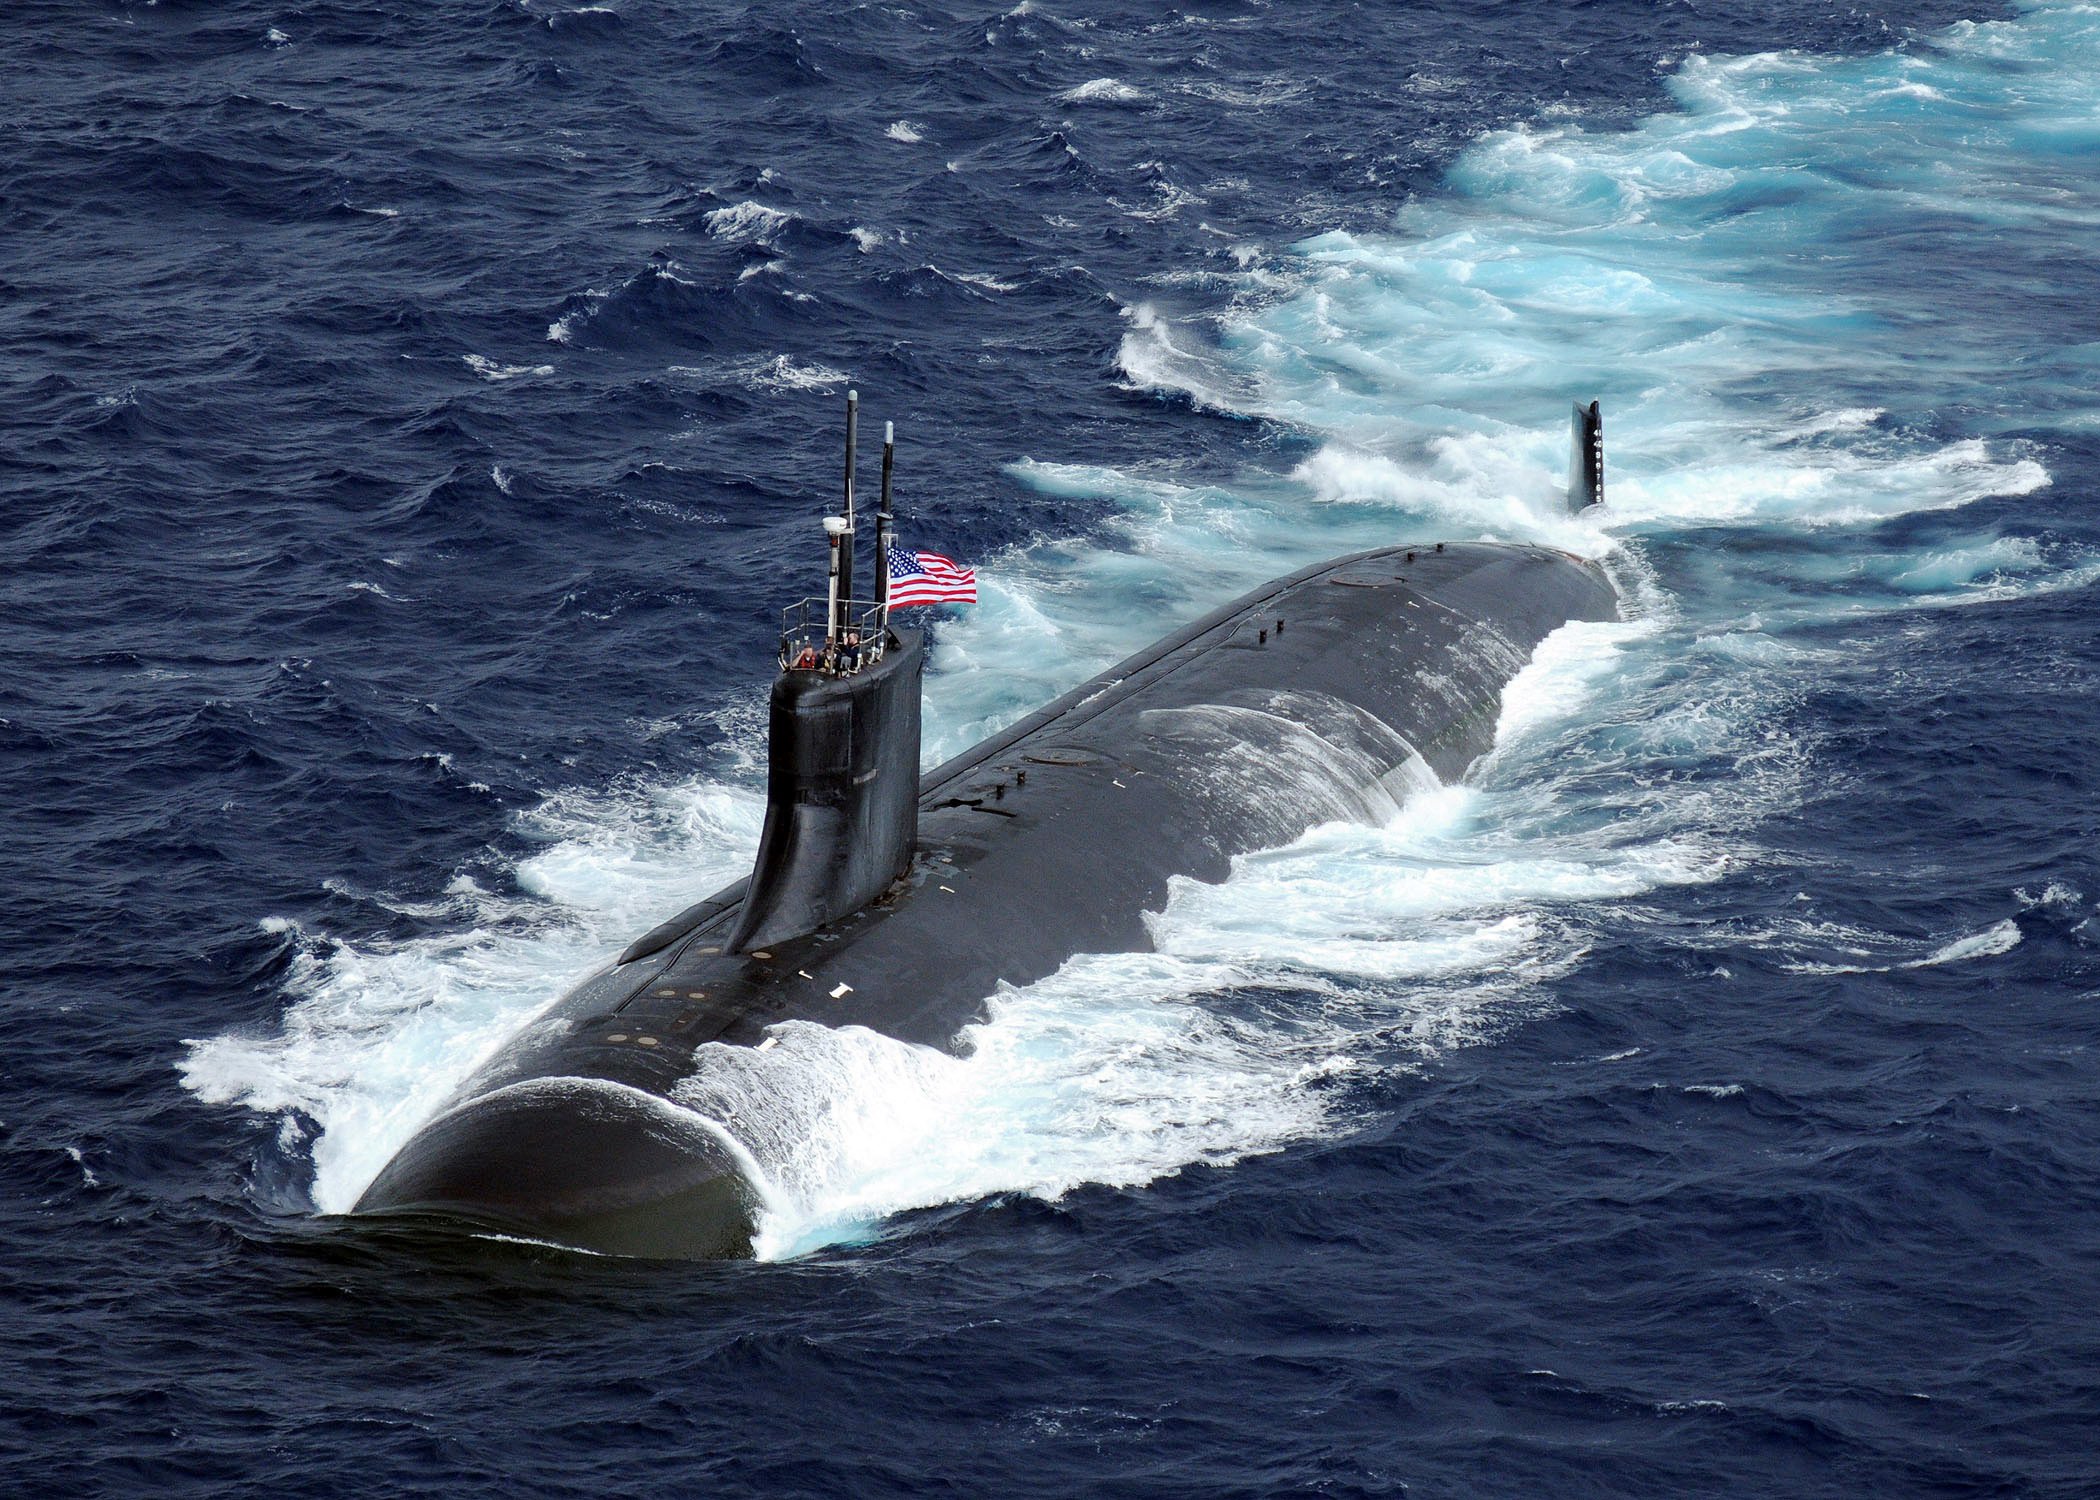 The USS Connecticut submarine was involved in an underwater accident in 2021, which has now helped Chinese researchers looking into submarine detection. Photo: US Navy